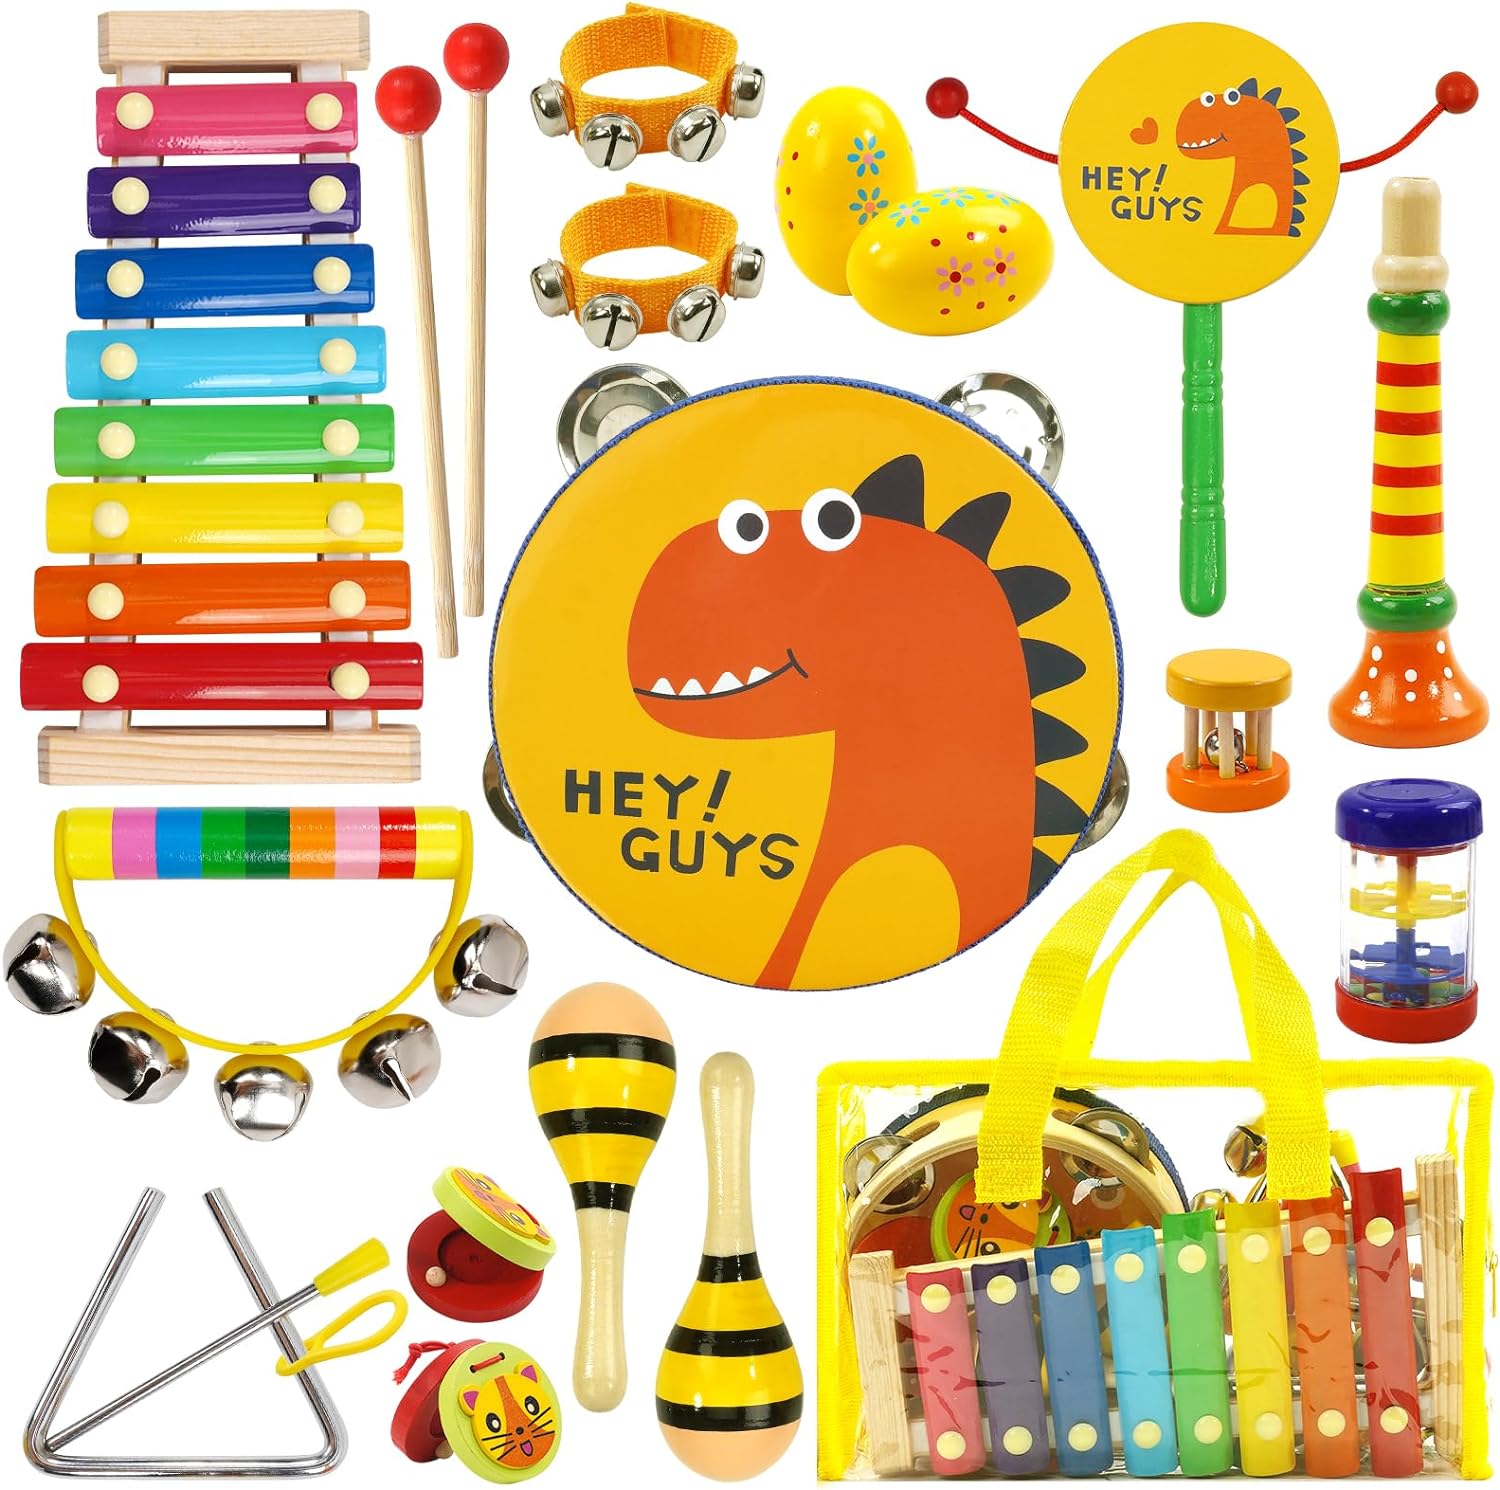 Raimy Kids Musical Instruments Set Review